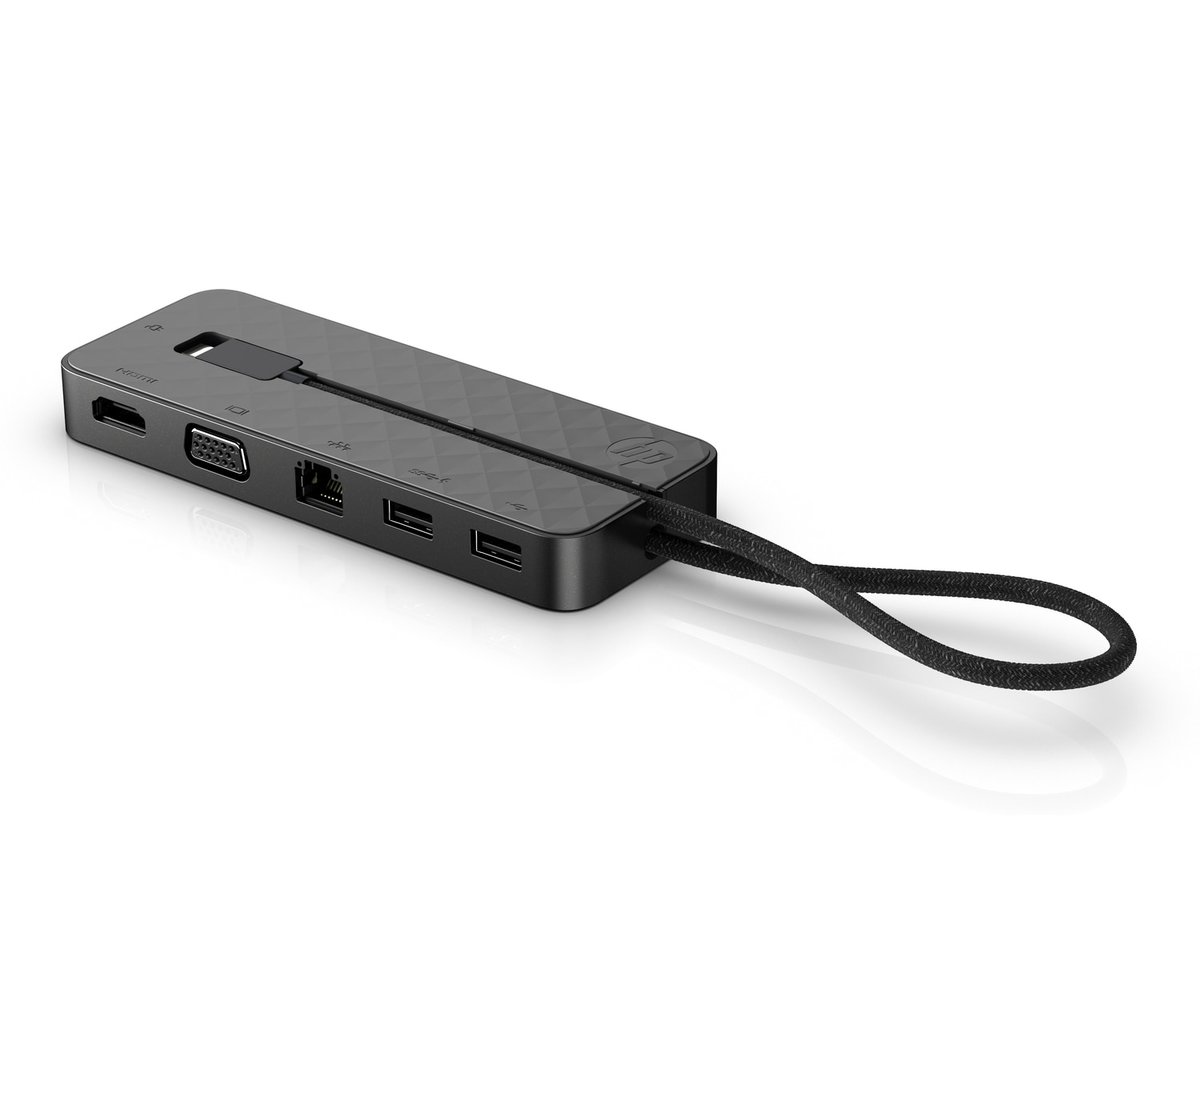 buy HP USB Type-C Mini Dock Replicator - 1xUSB3.0 Charging 1xUSB 2.0 1xVGA 1xHDMI LAN for HP Business Laptop PCs HP Thin Clients HP Care Pack Services HP online from our Melbourne shop